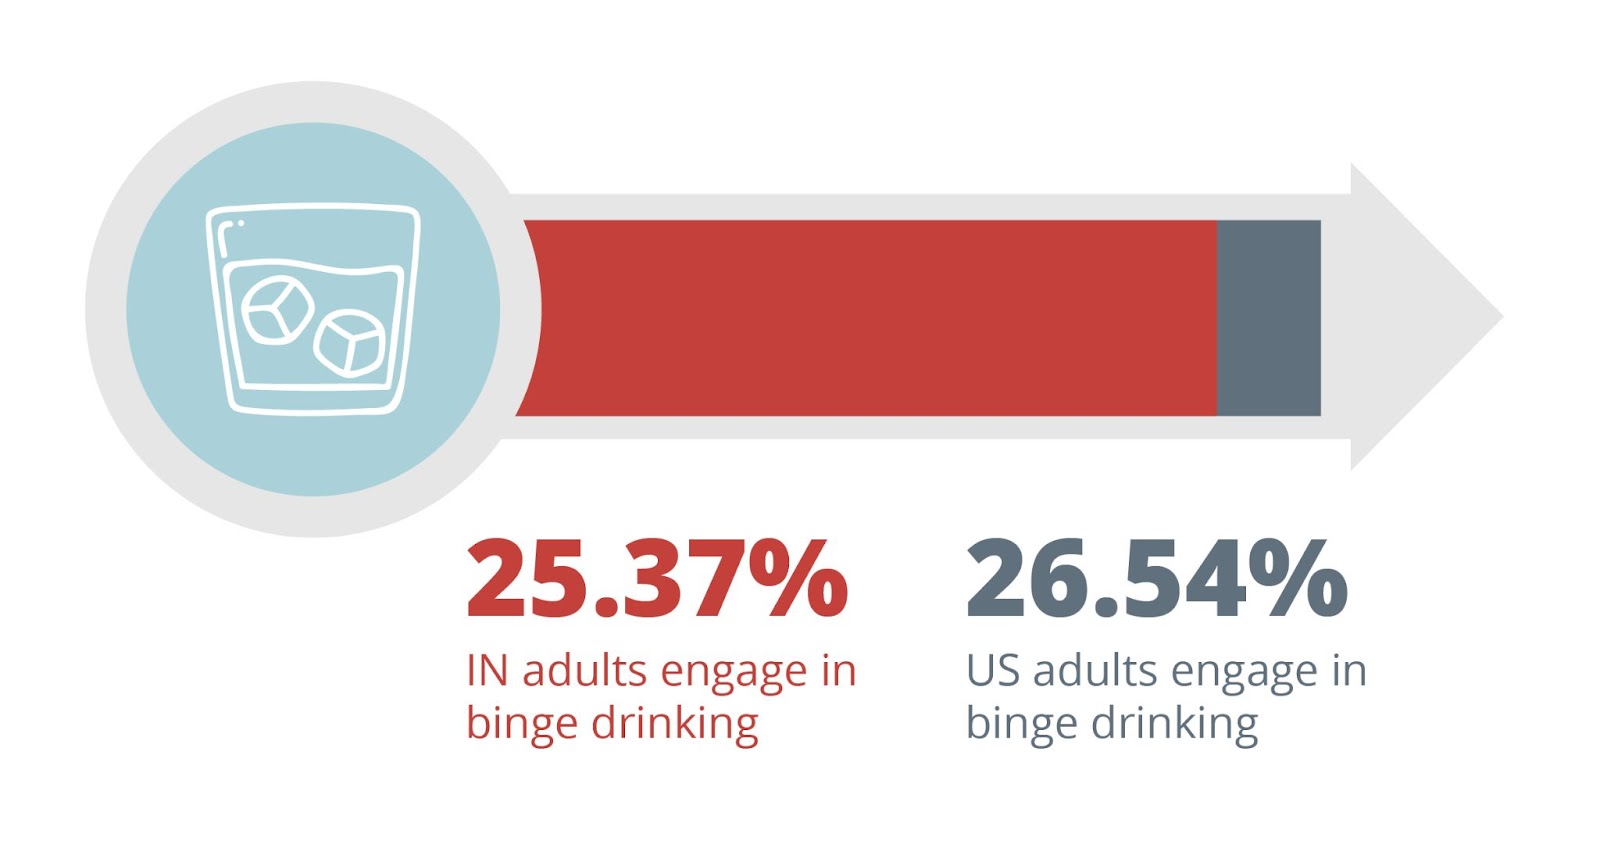 25.37 indiana adults engage in binge drinking. 26.54 american adults engage in binge drinking